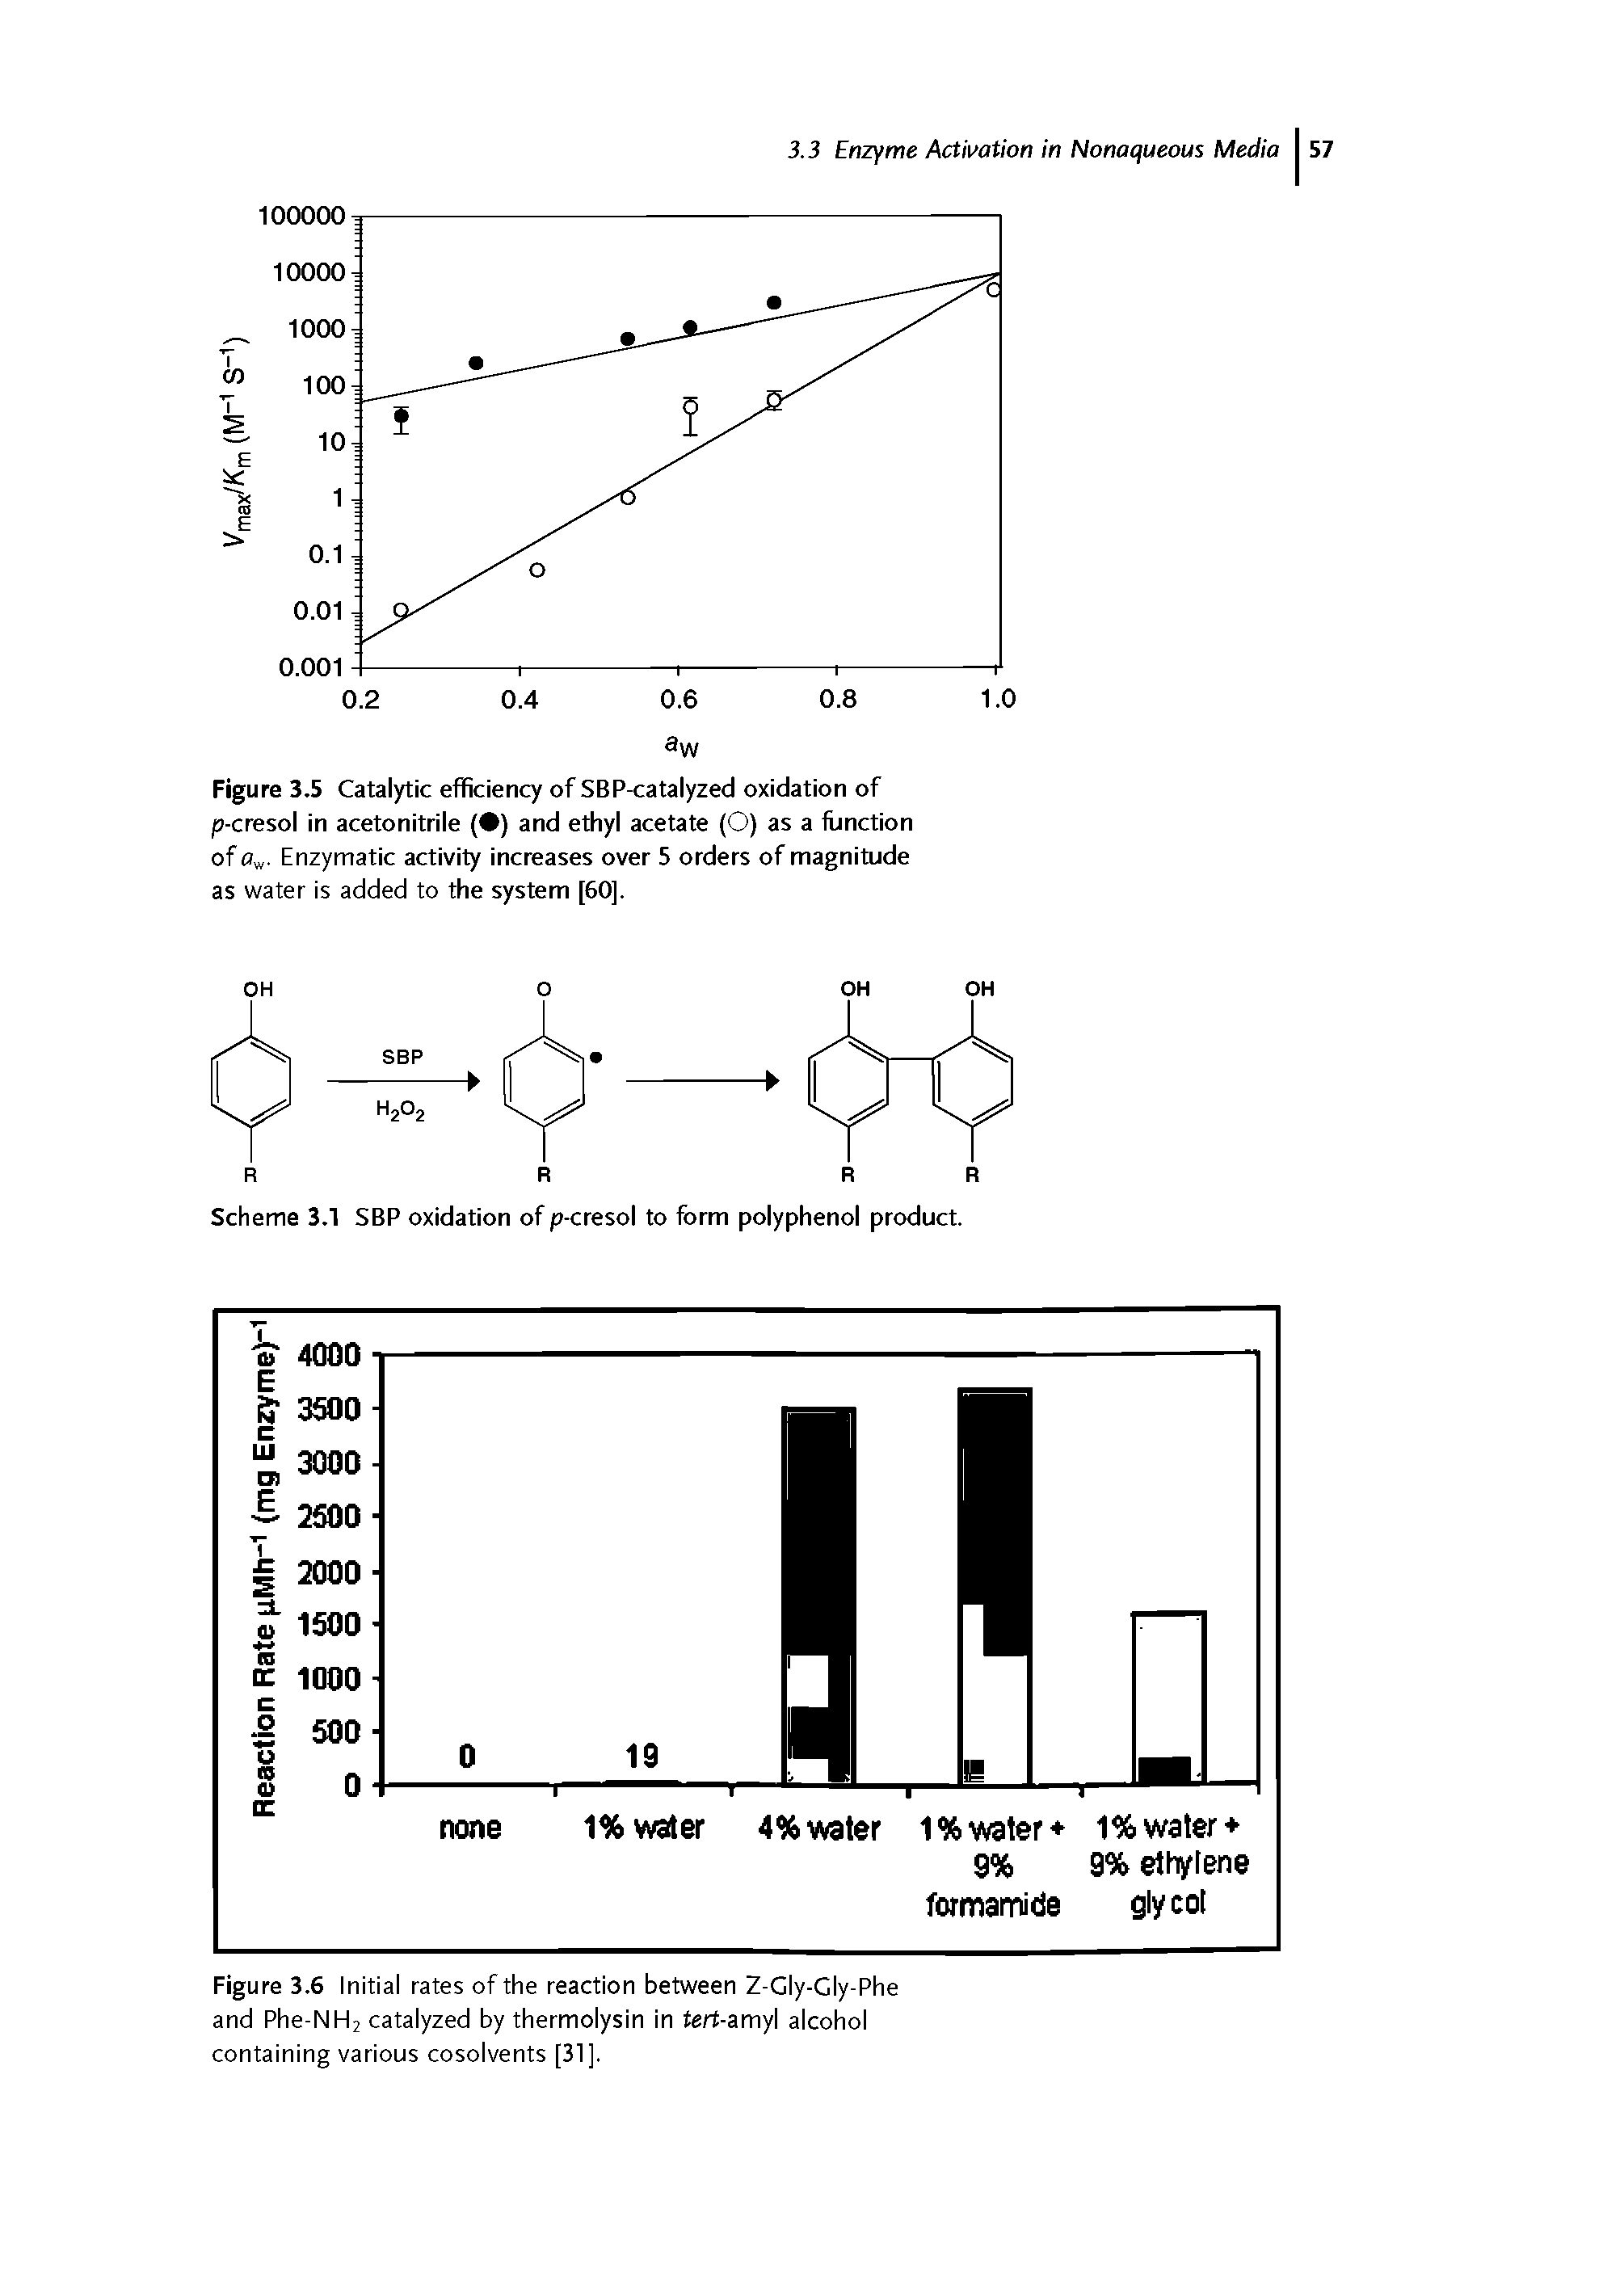 Figure 3.6 Initial rates of the reaction between Z-Gly-Gly-Phe and Phe-NH2 catalyzed by thermolysin in ferf-amyl alcohol containing various cosolvents [31].